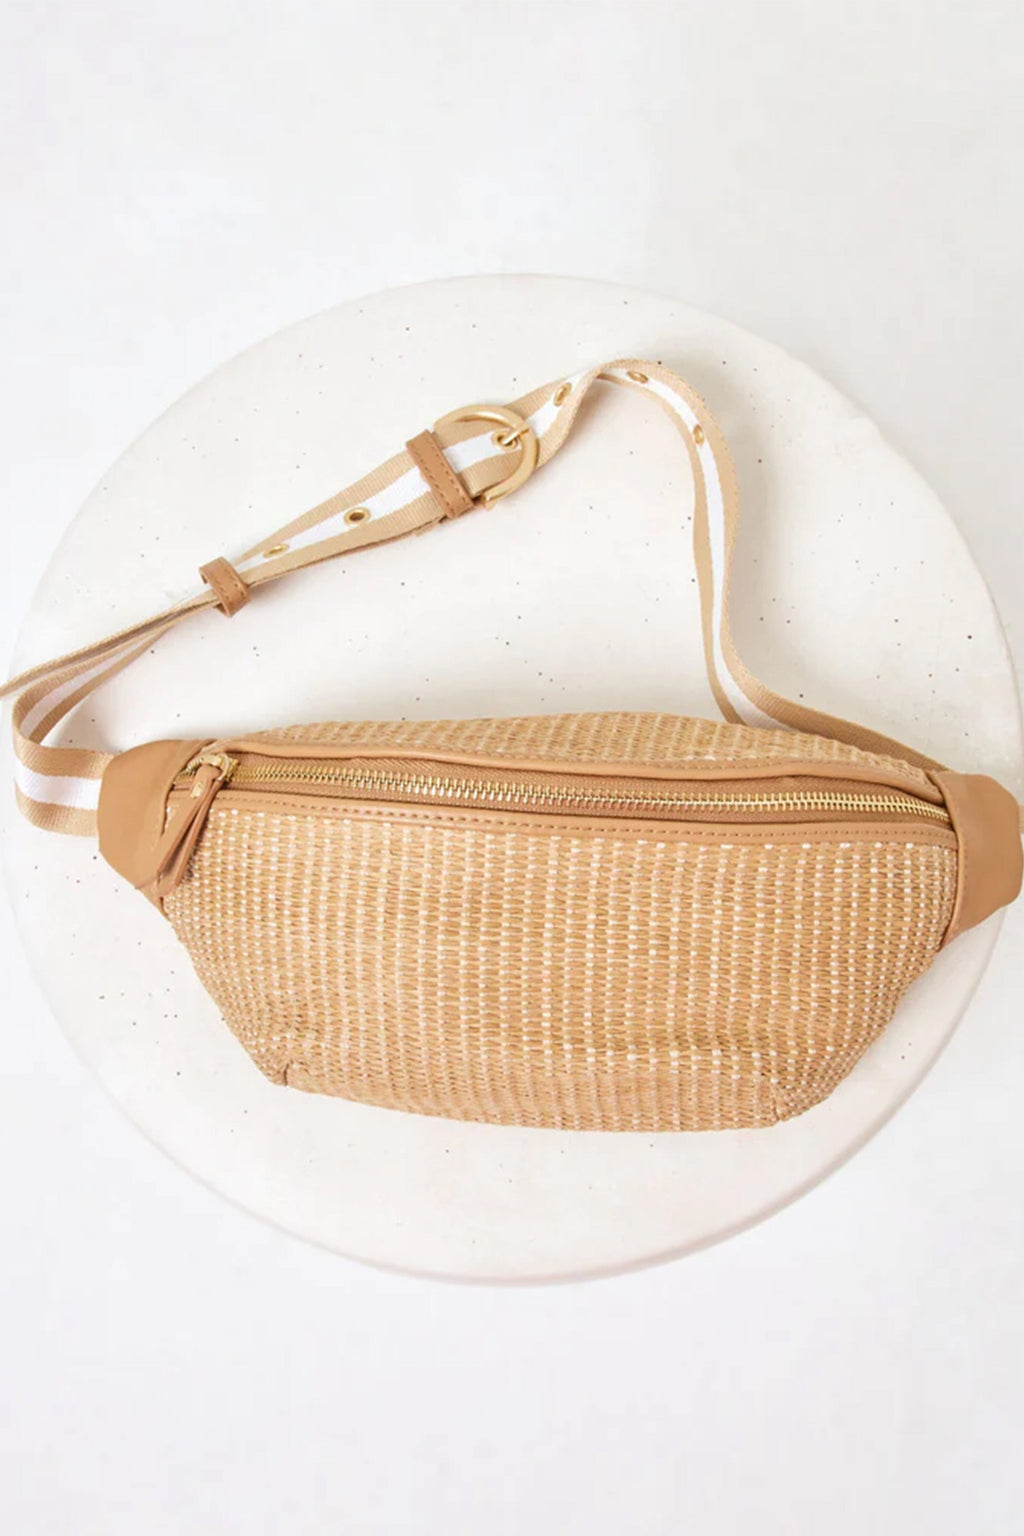 L SPACE | Evie Fanny Pack - Natural